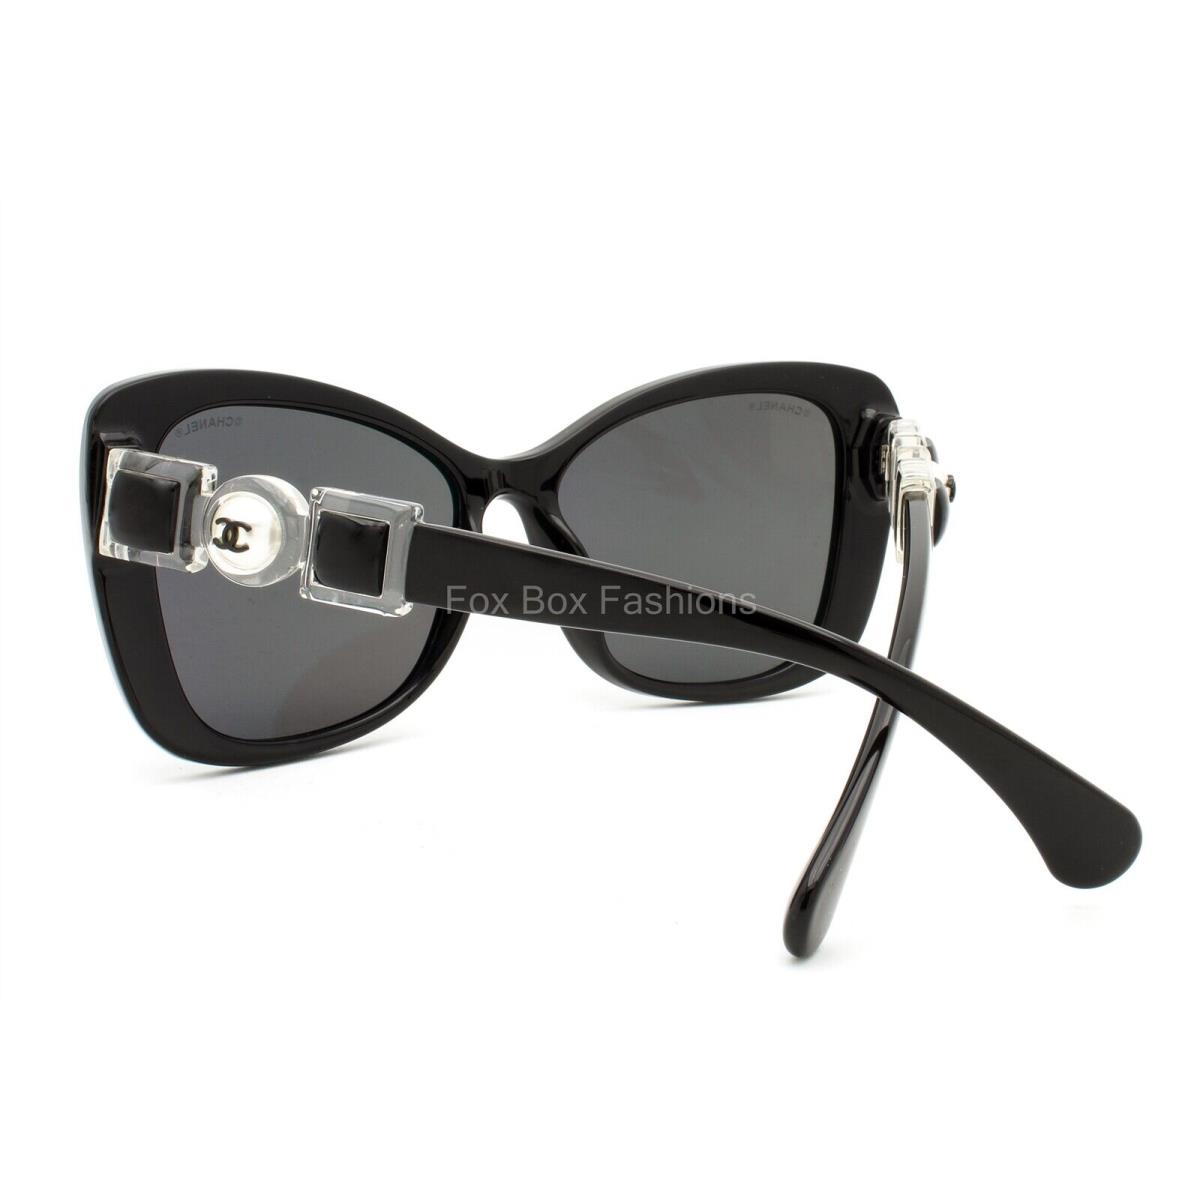 Chanel 5445H 501/S4 Butterfly Sunglasses Polished Black w/ Glass Pearls